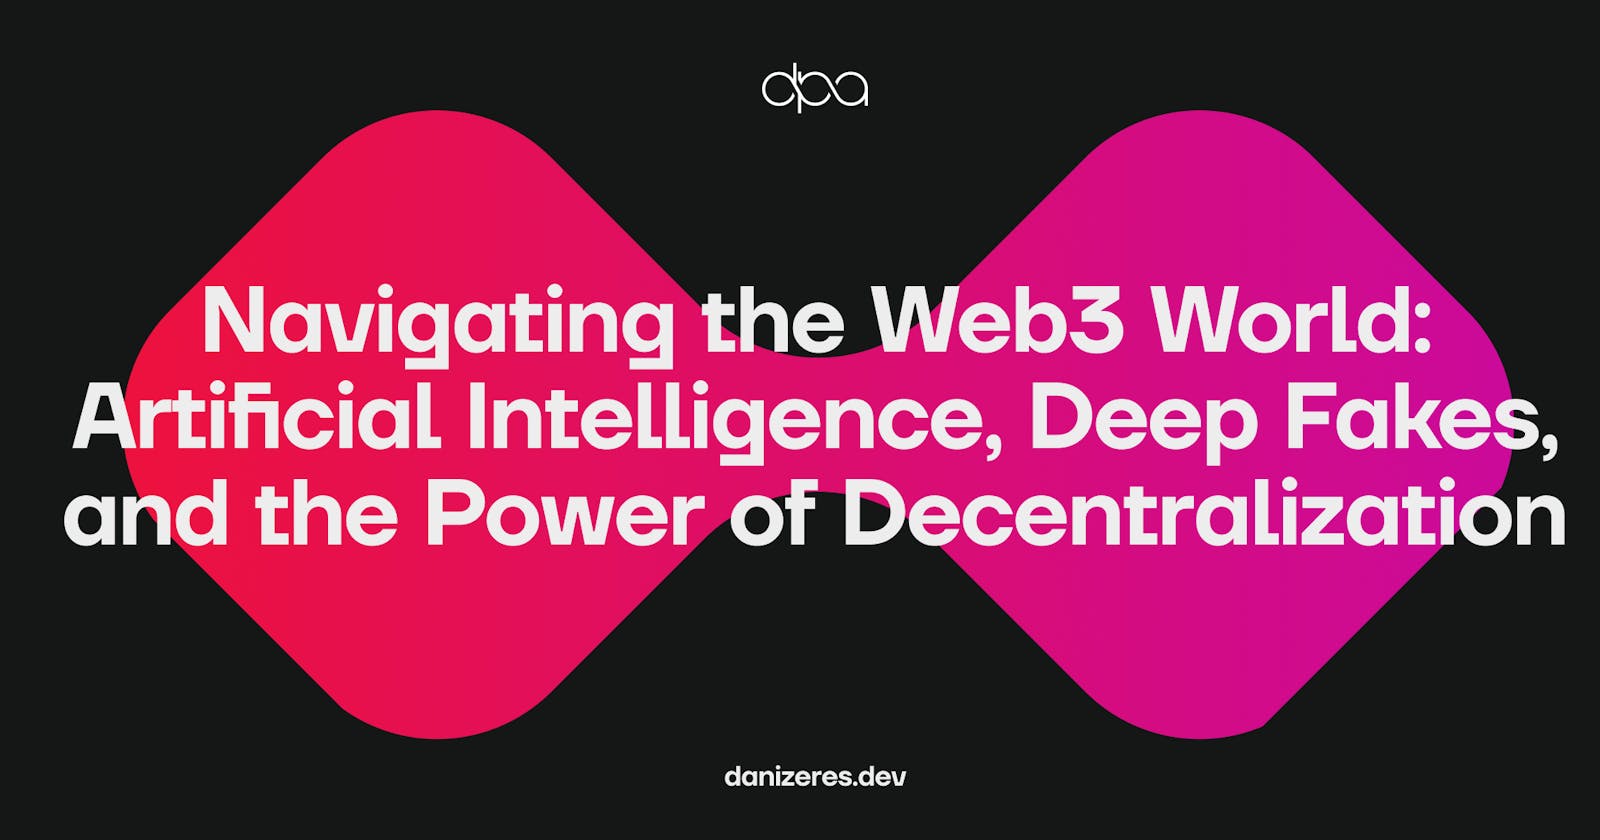 Navigating the Web3 World: Artificial Intelligence, Deep Fakes, and the Power of Decentralization